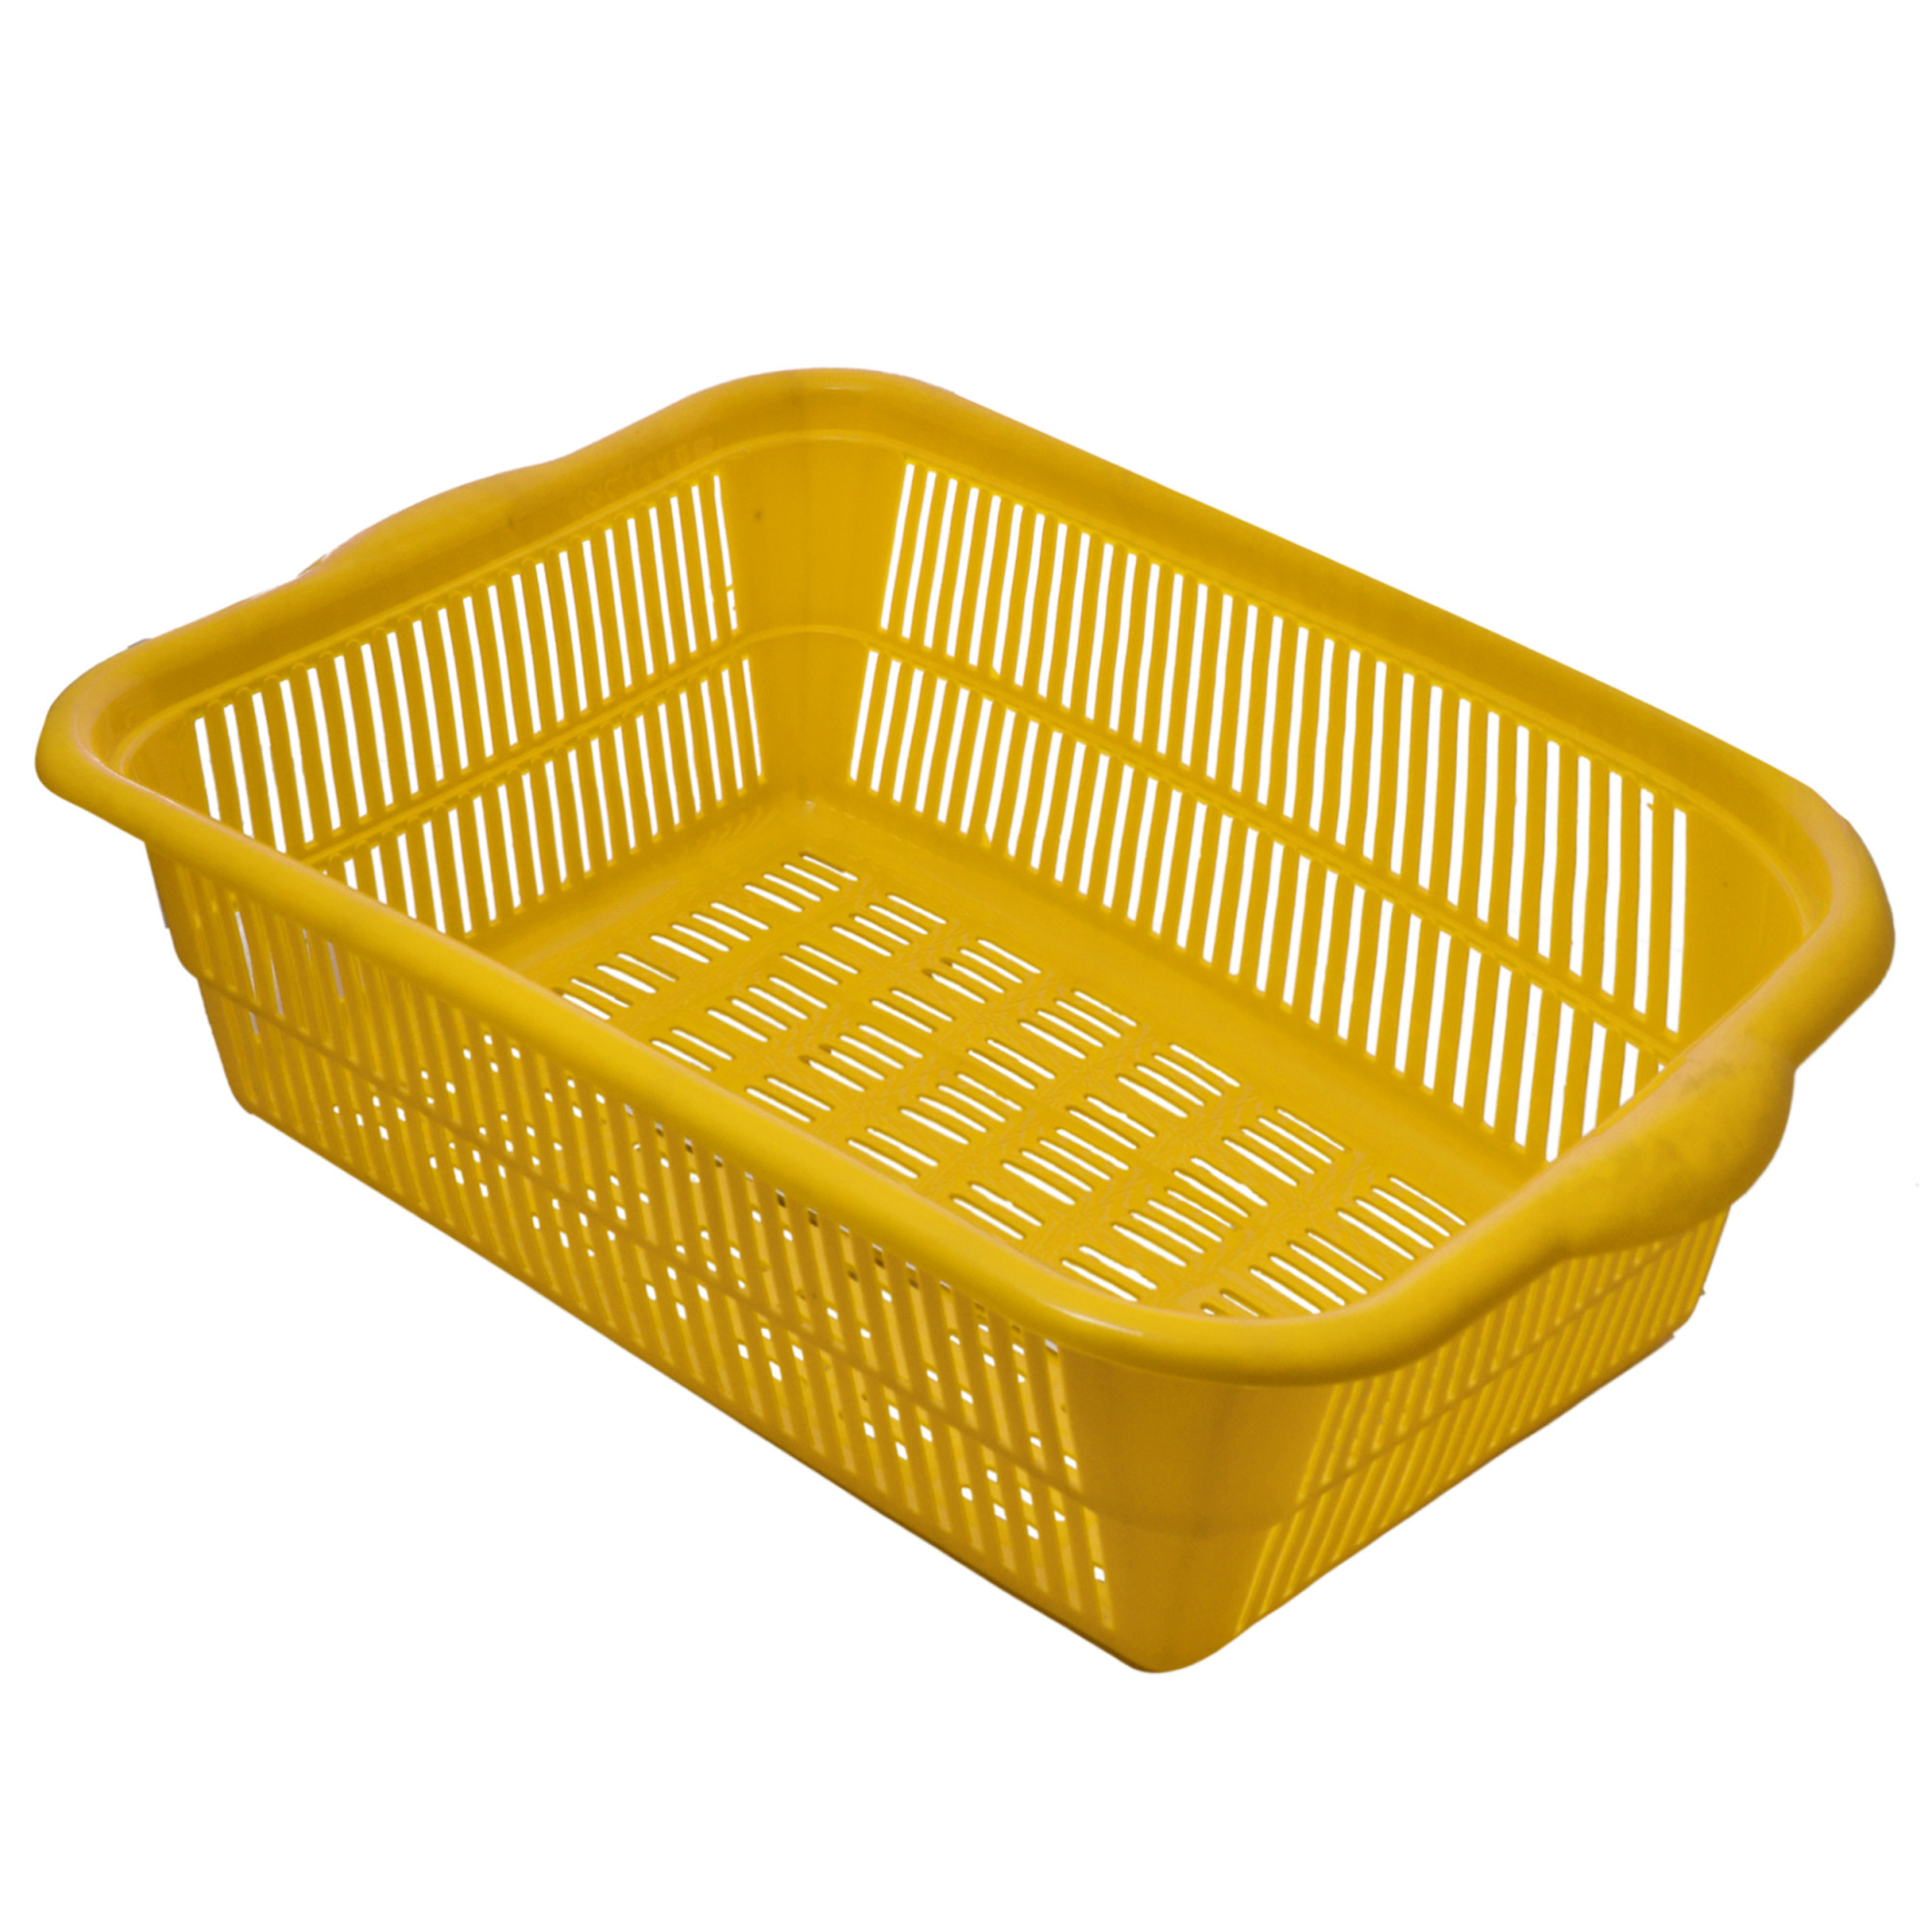 Kuber Industries 4 Pieces Plastic Kitchen Dish Rack Drainer Vegetables And Fruits Basket Dish Rack Multipurpose Organizers ,Small Size,Yellow